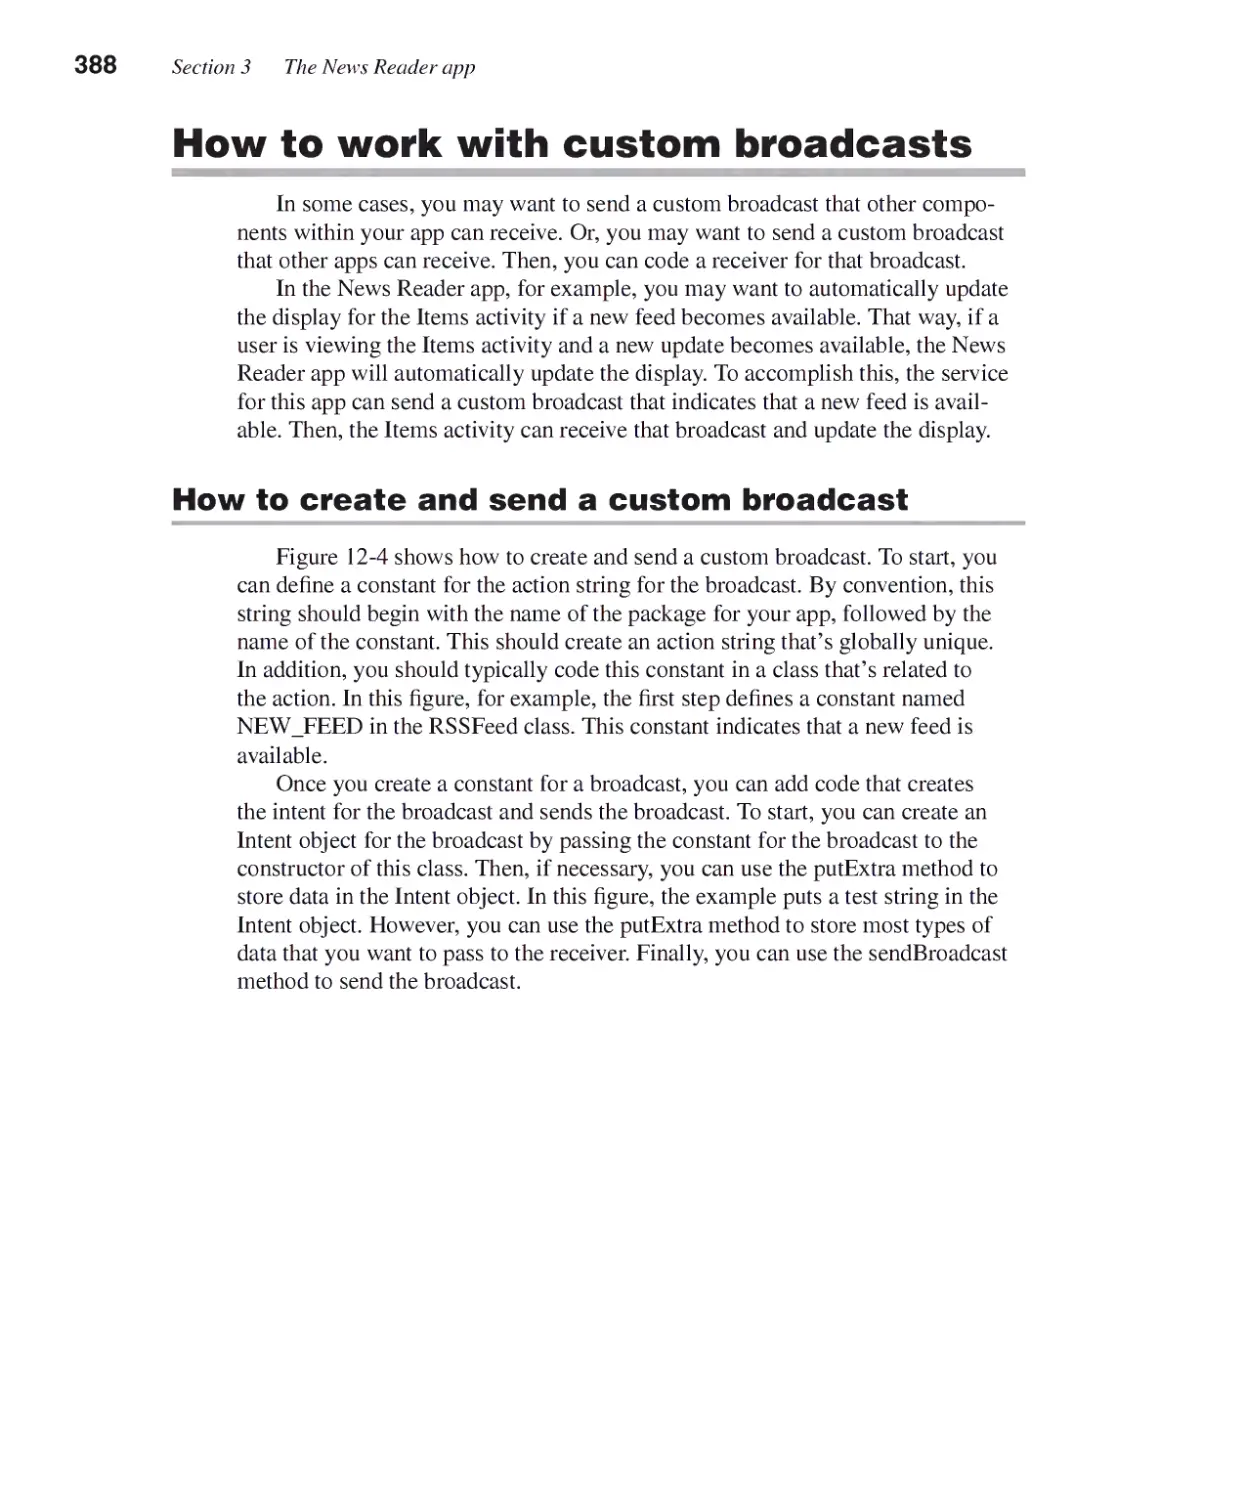 How to Work with Custom Broadcasts